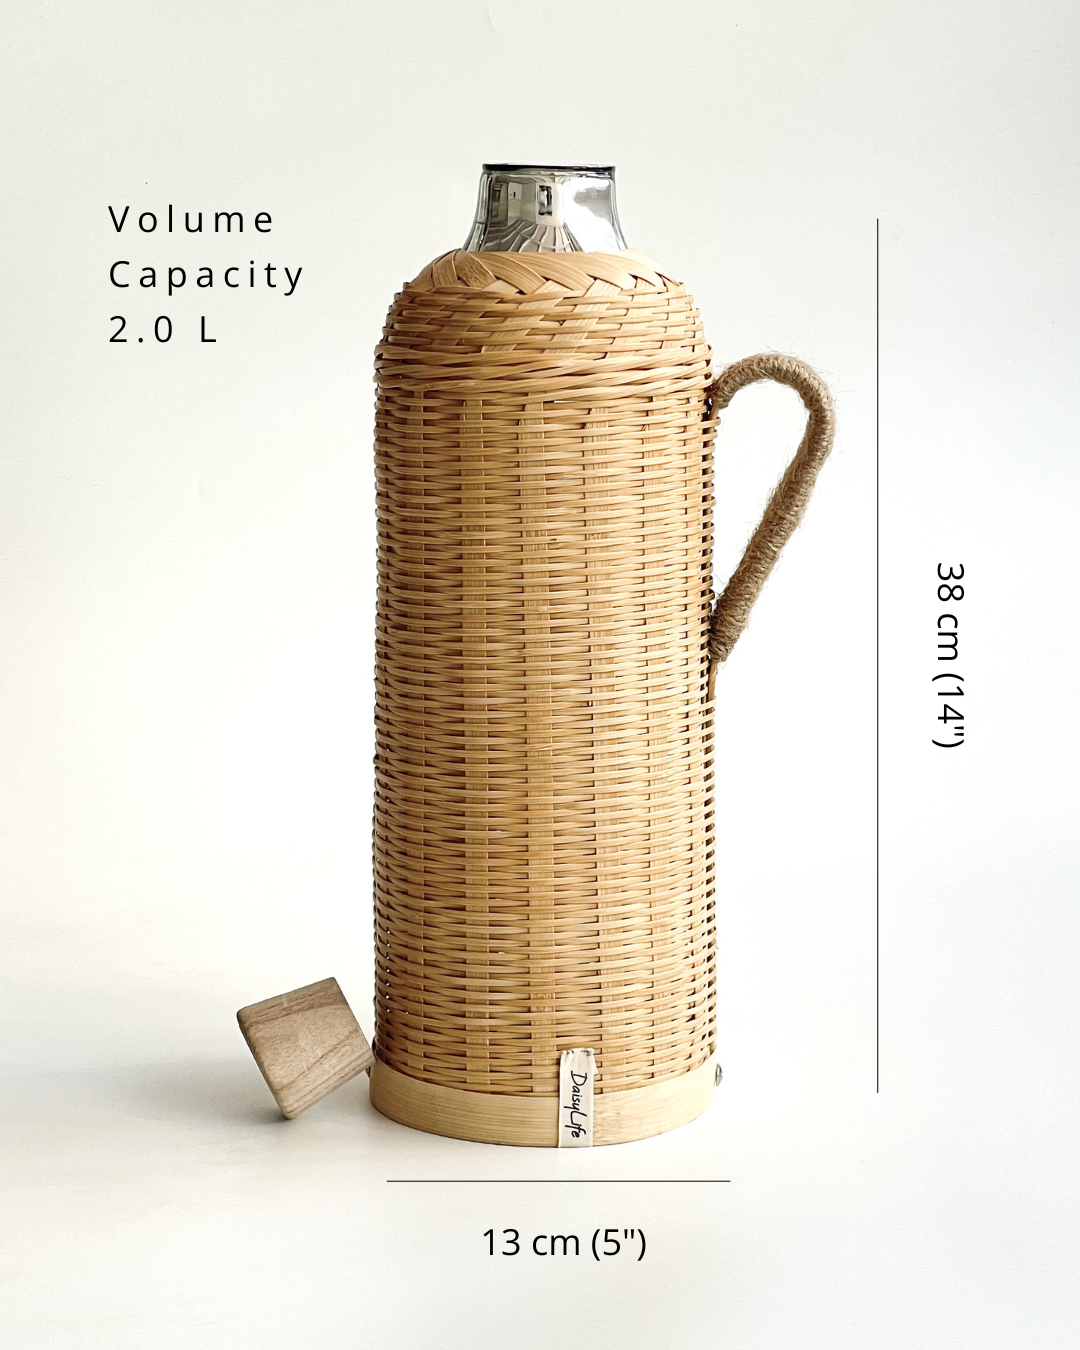 Bamboo Flask big with Volume Capacity 2.0 L